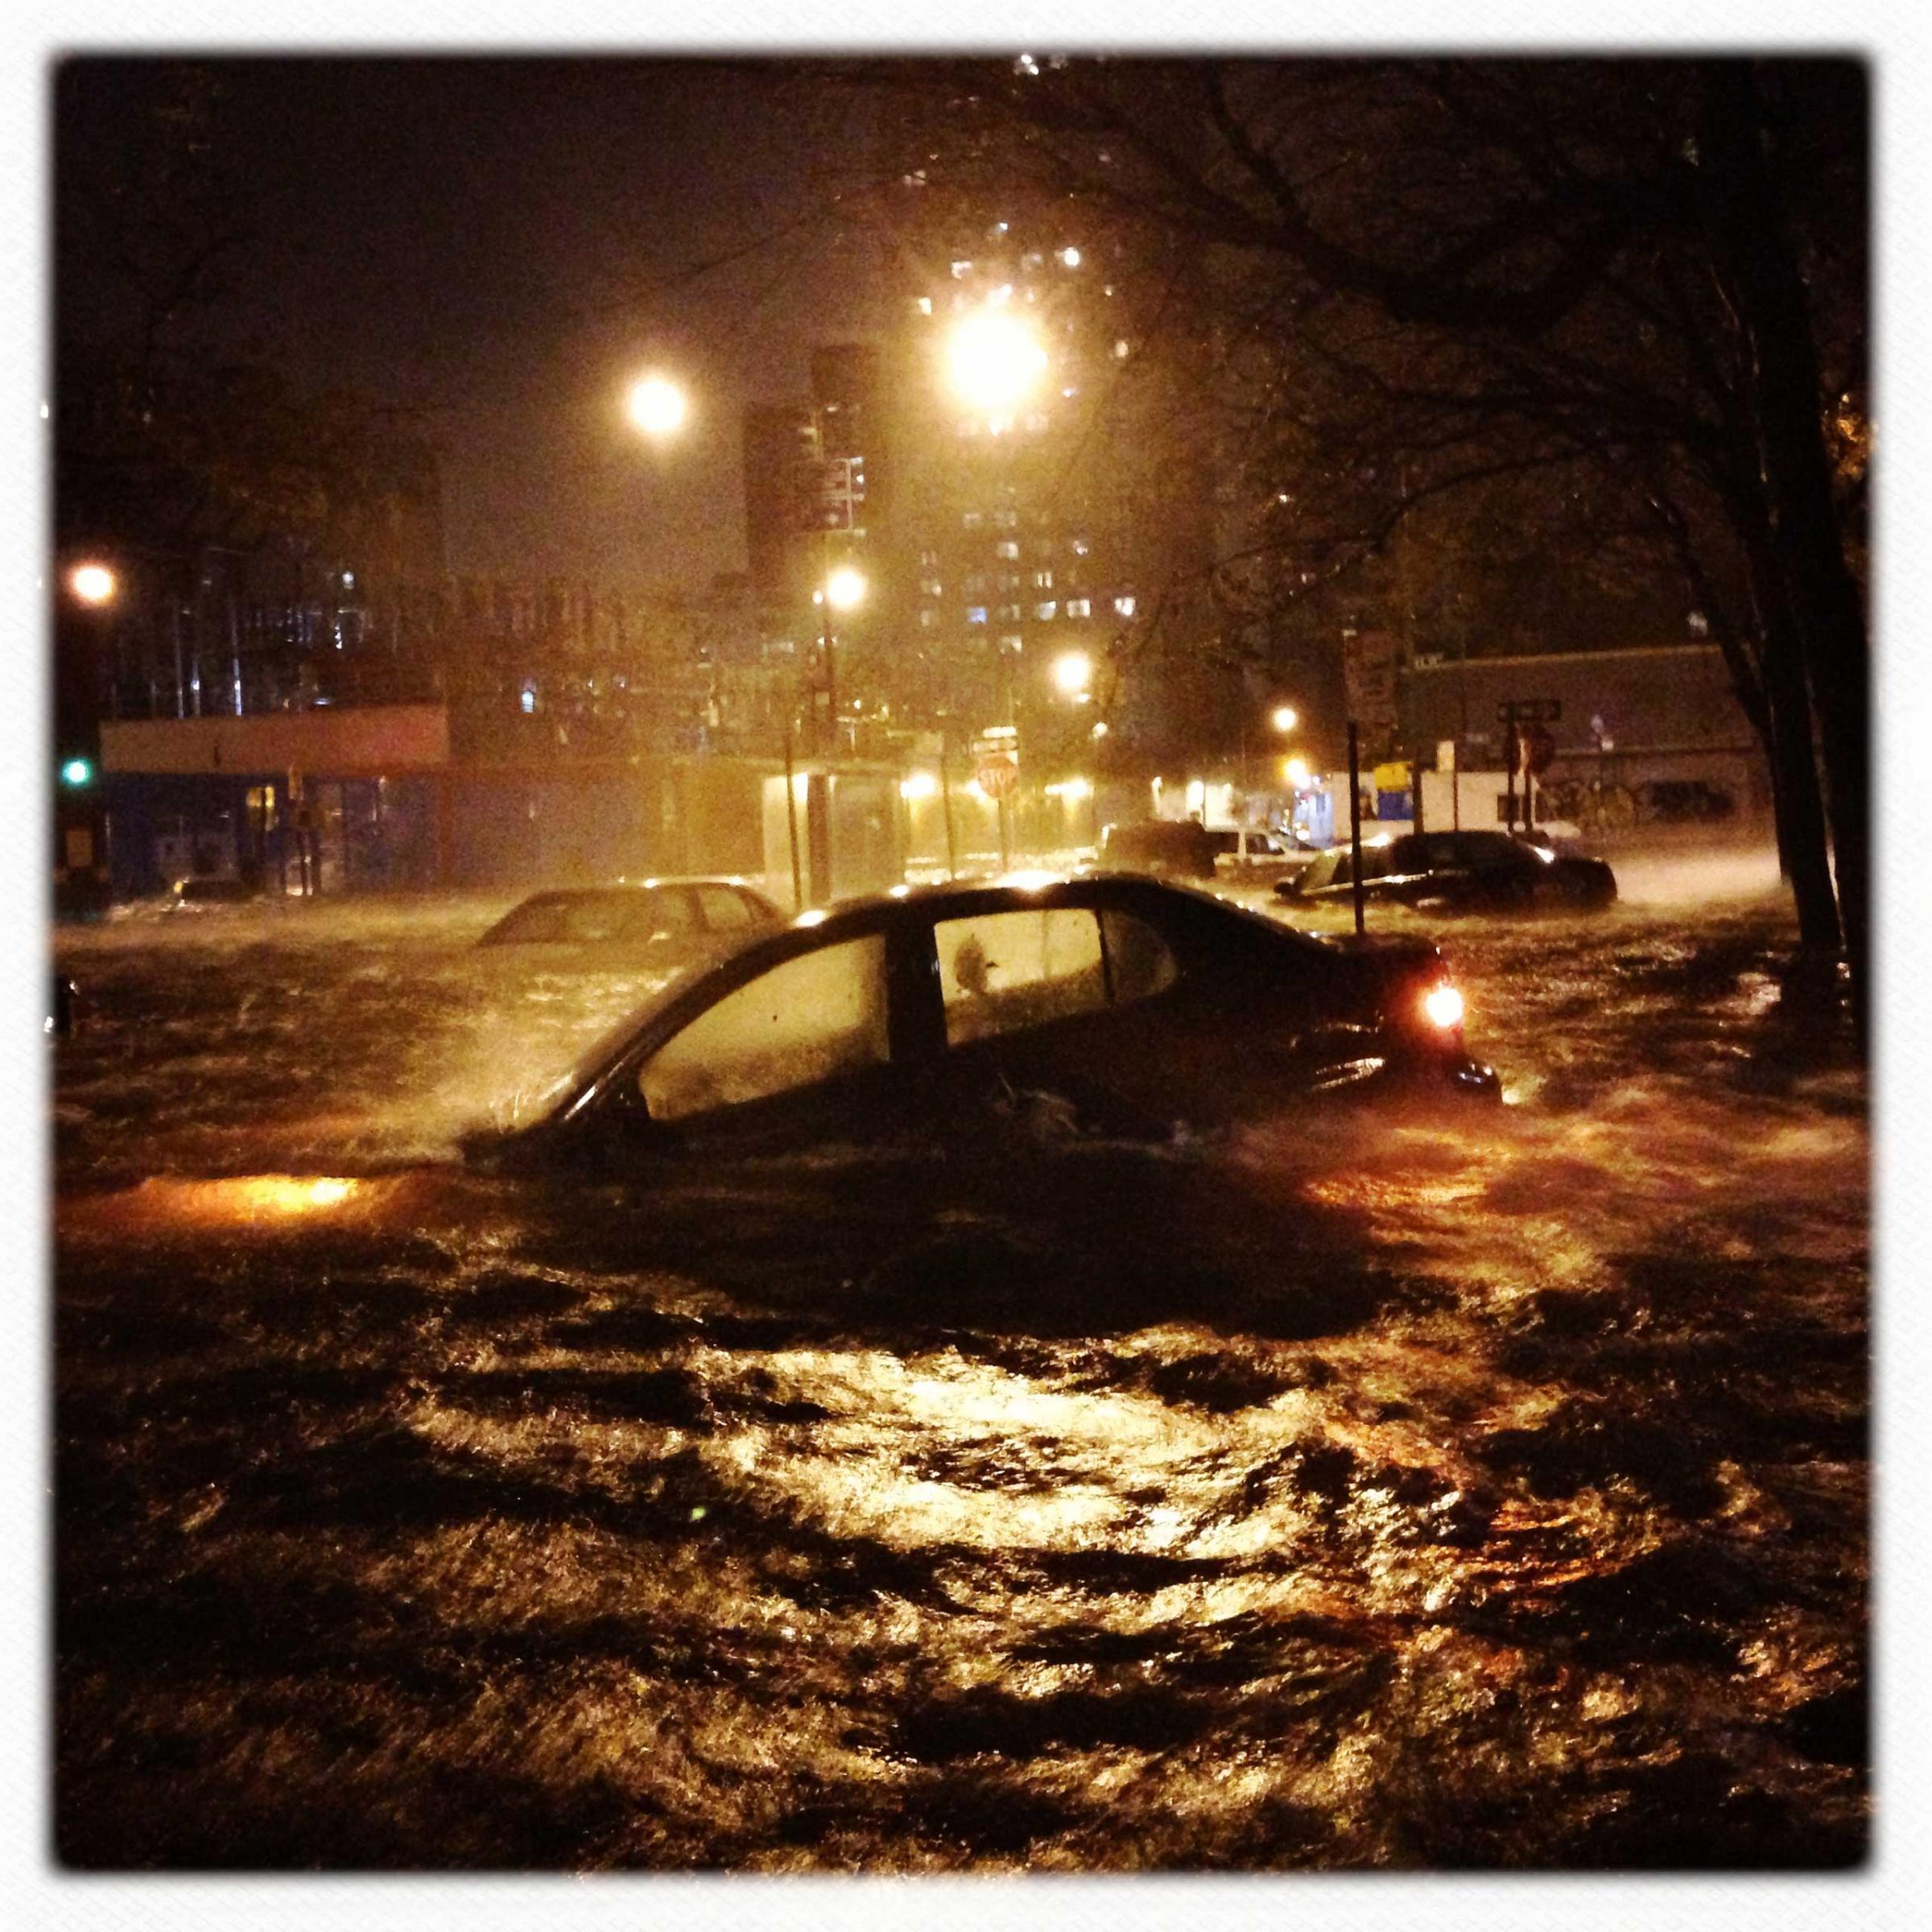 A car is submerged in floodwater on Avenue C, near 14th Street, in Manhattan